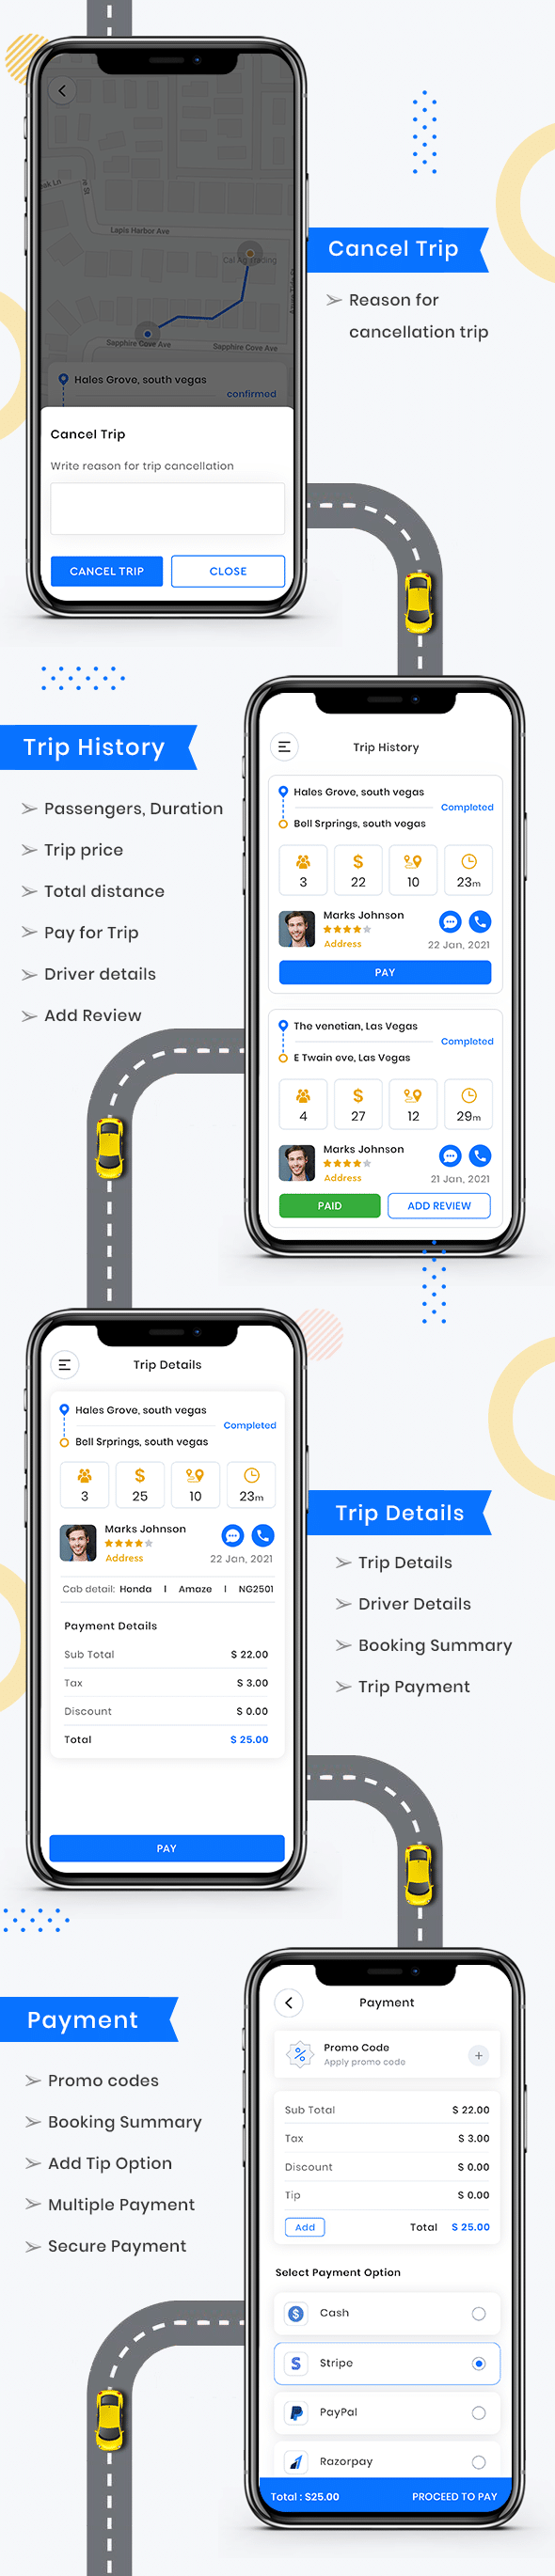 CabME - Flutter Complete Taxi Booking Solution - 7